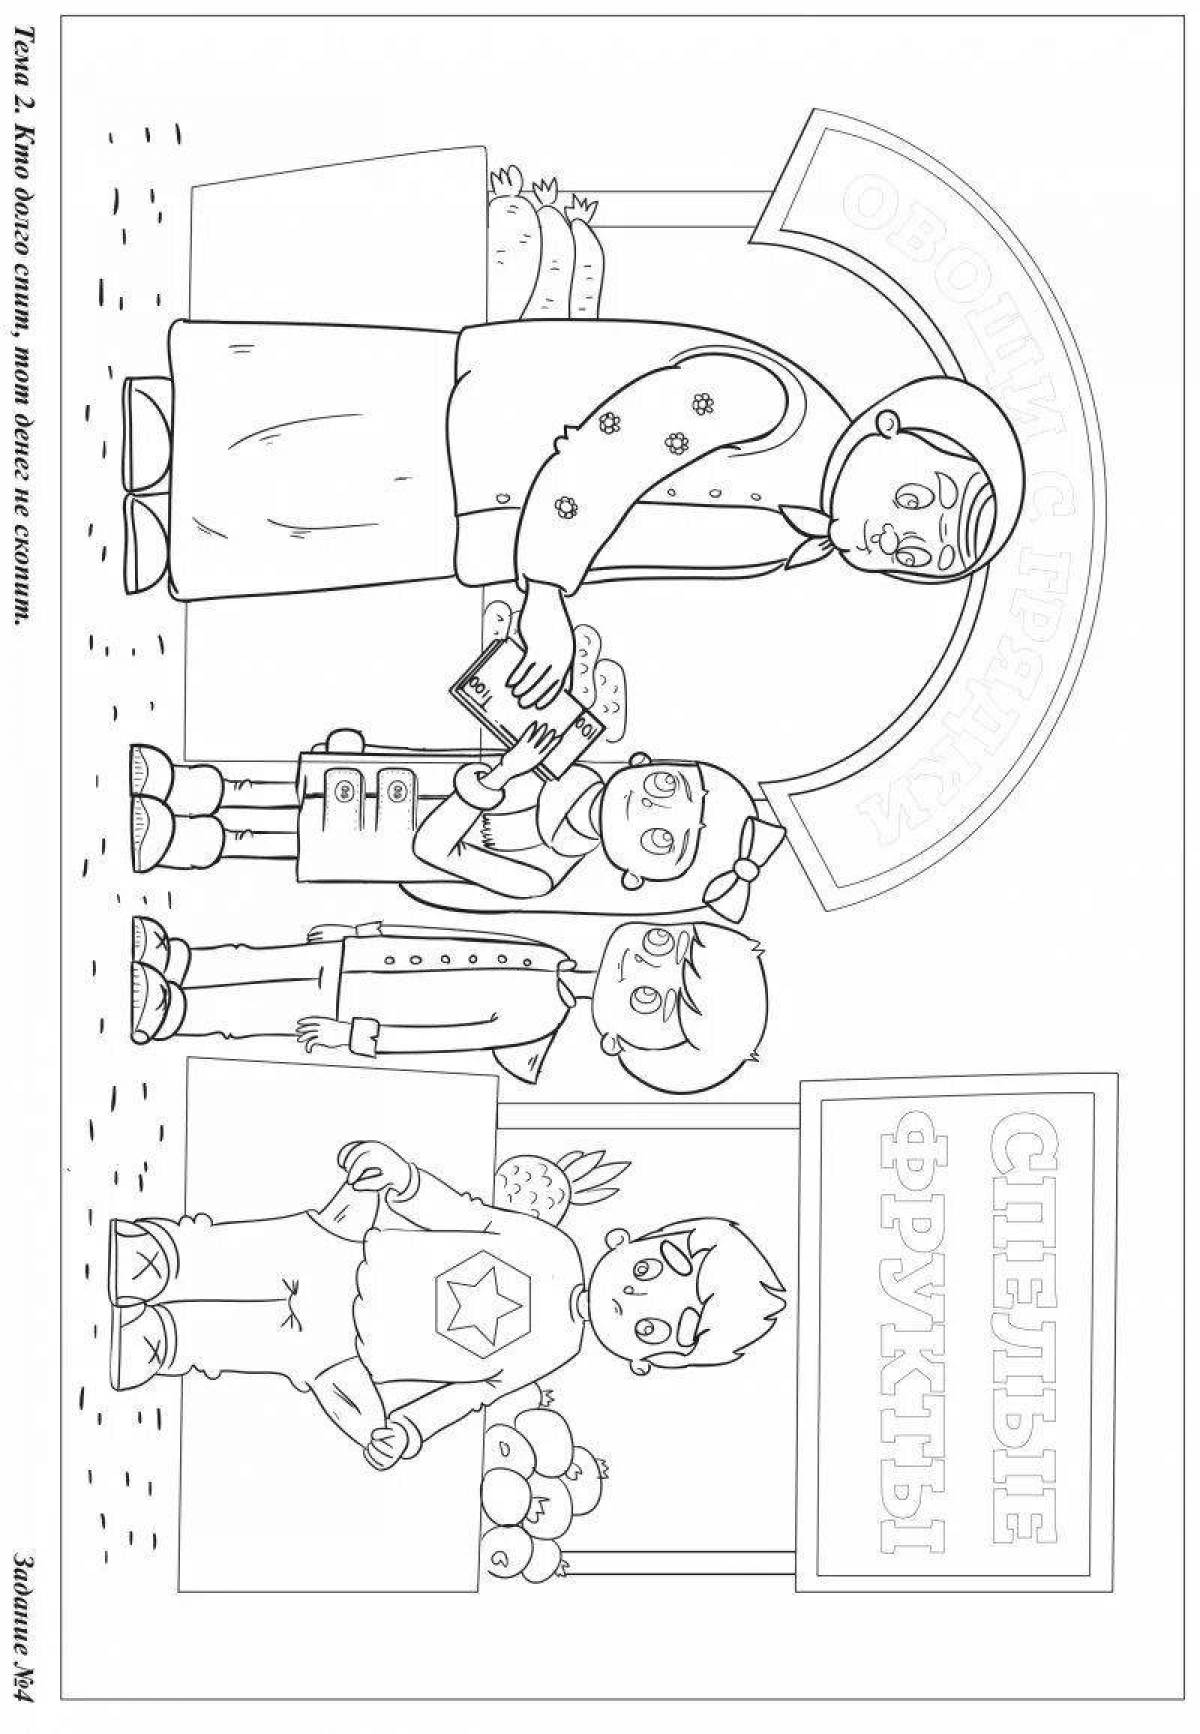 Colorful financial literacy coloring page for kids